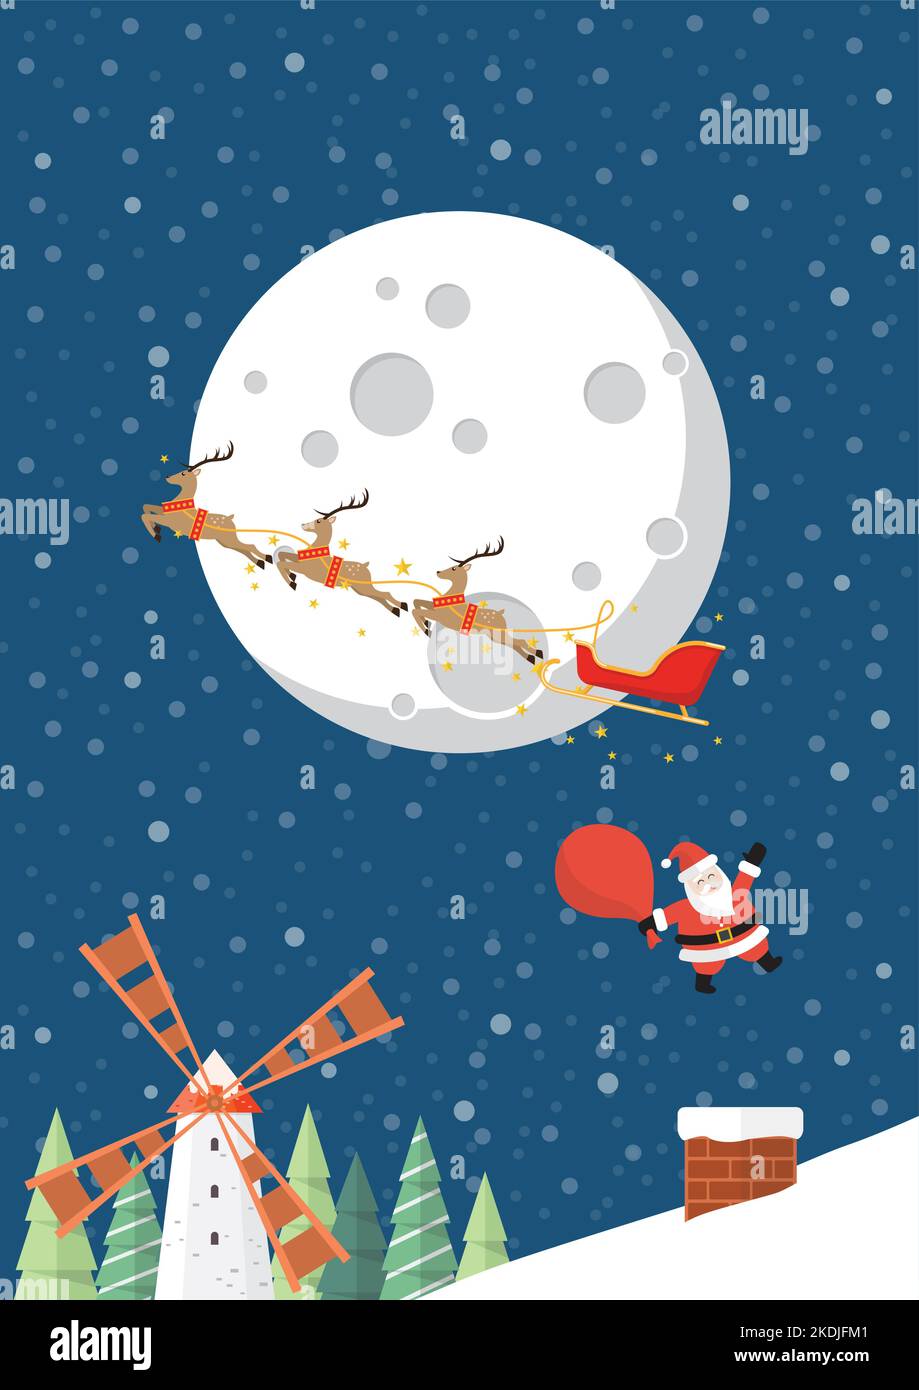 Santa Claus jumping from reindeer sleigh into the chimney at night. greeting card vector illustration Stock Vector